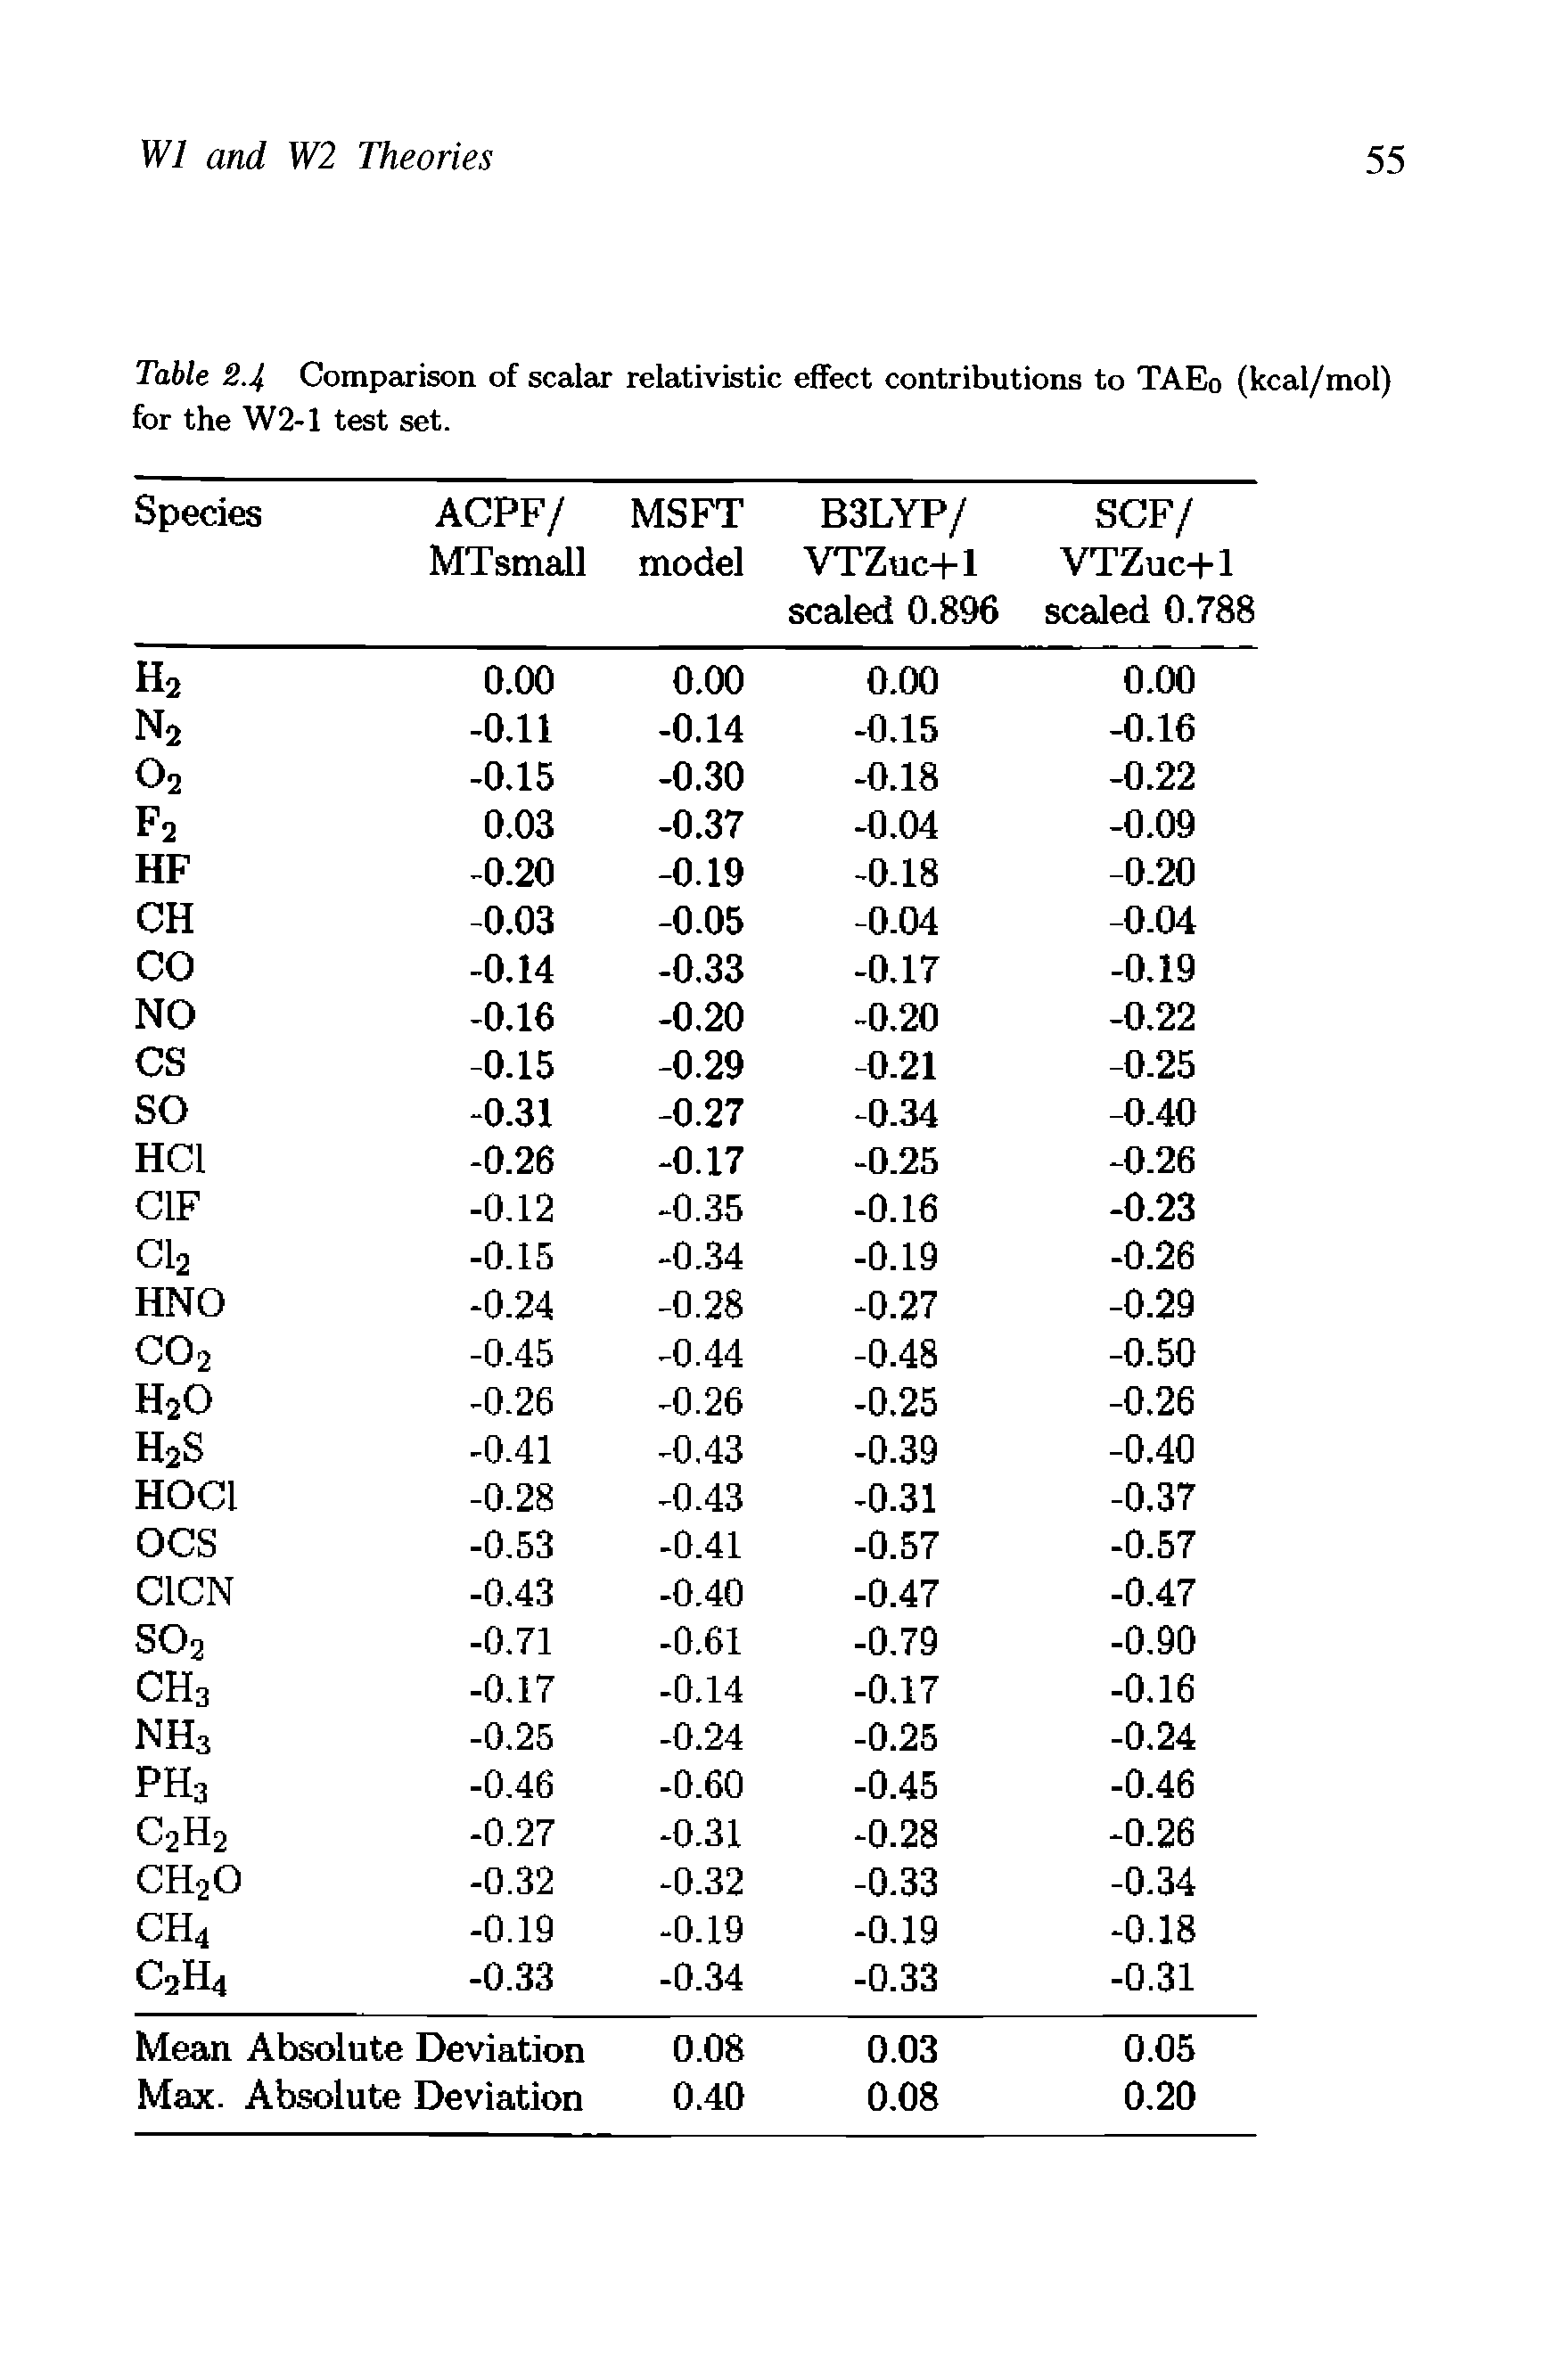 Table 2.4 Comparison of scalar relativistic effect contributions to TAEo (kcal/mol) for the W2-1 test set.